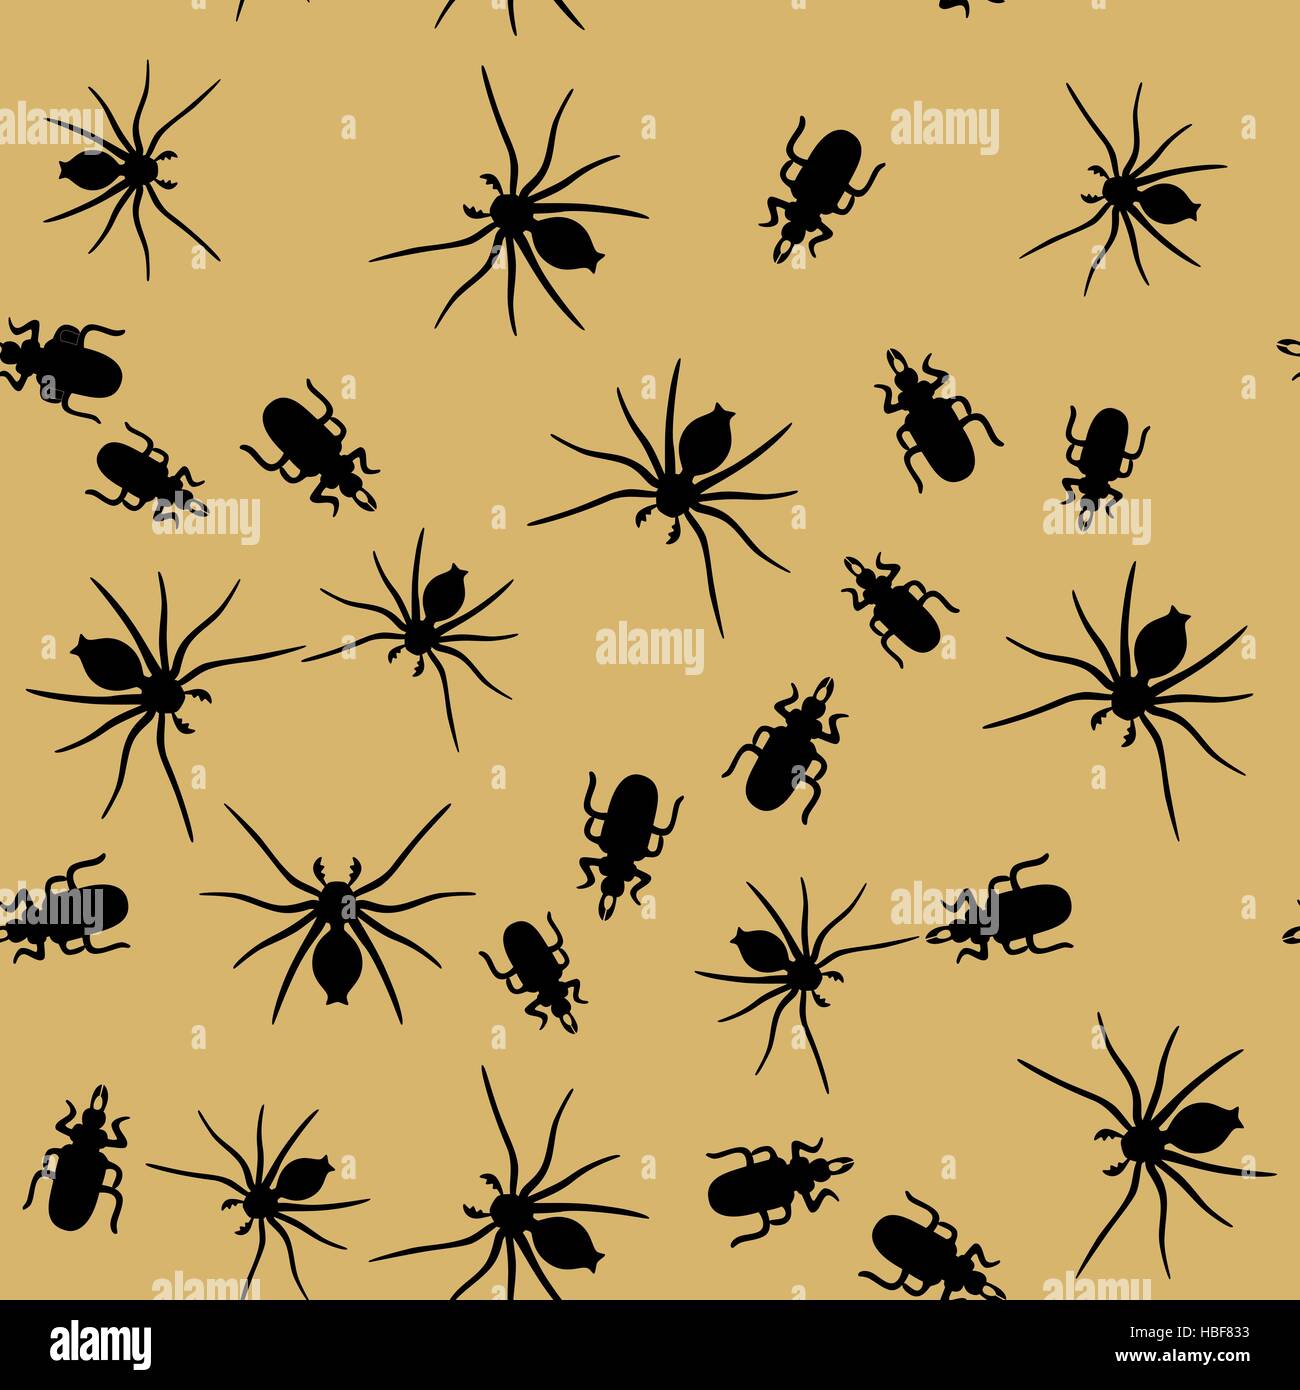 Beetle and spider insects seamless pattern 666 Stock Photo